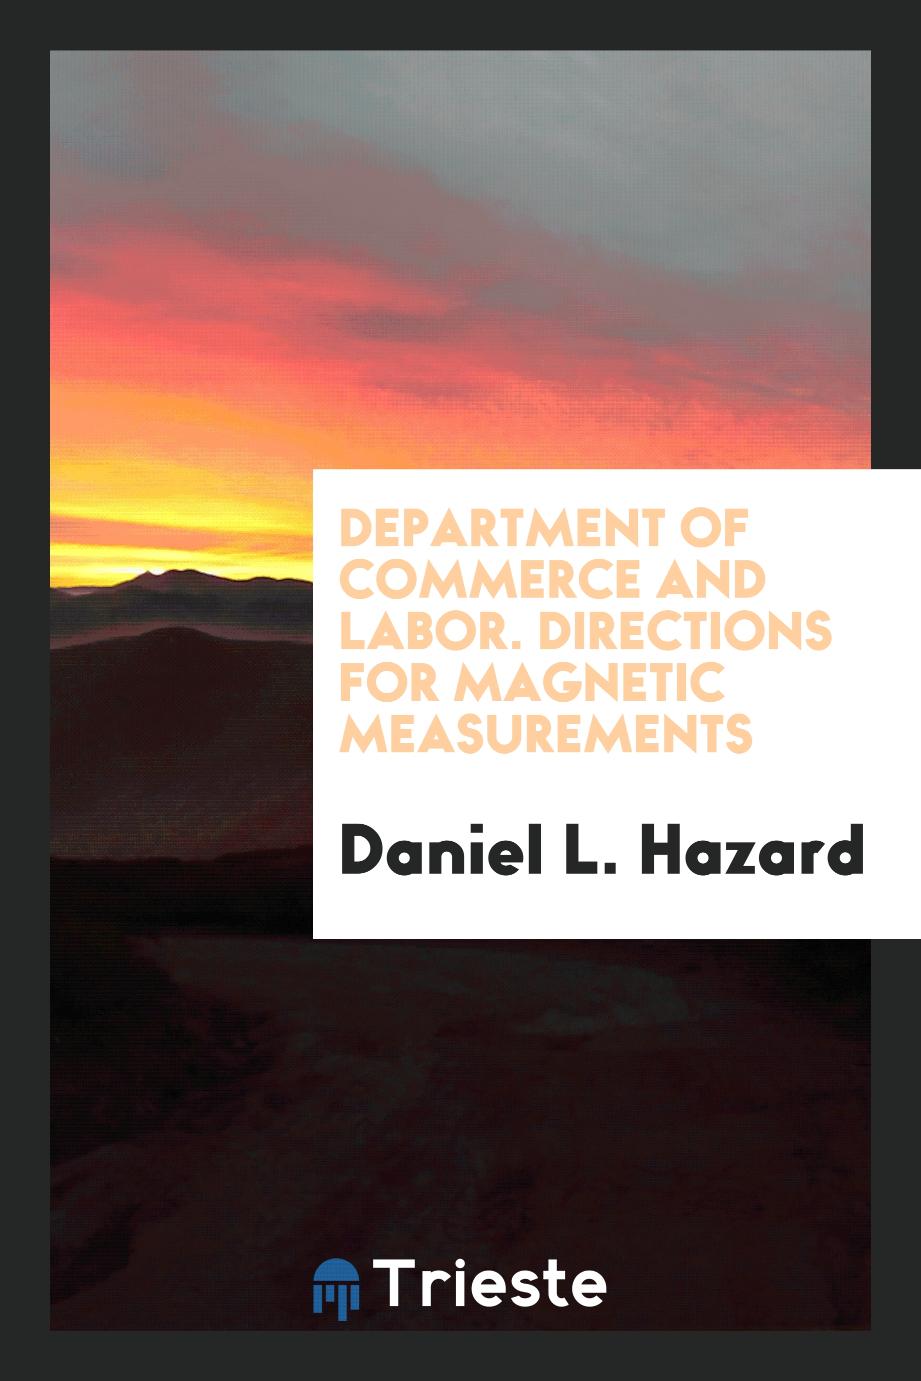 Daniel L. Hazard - Department of Commerce and Labor. Directions for Magnetic Measurements